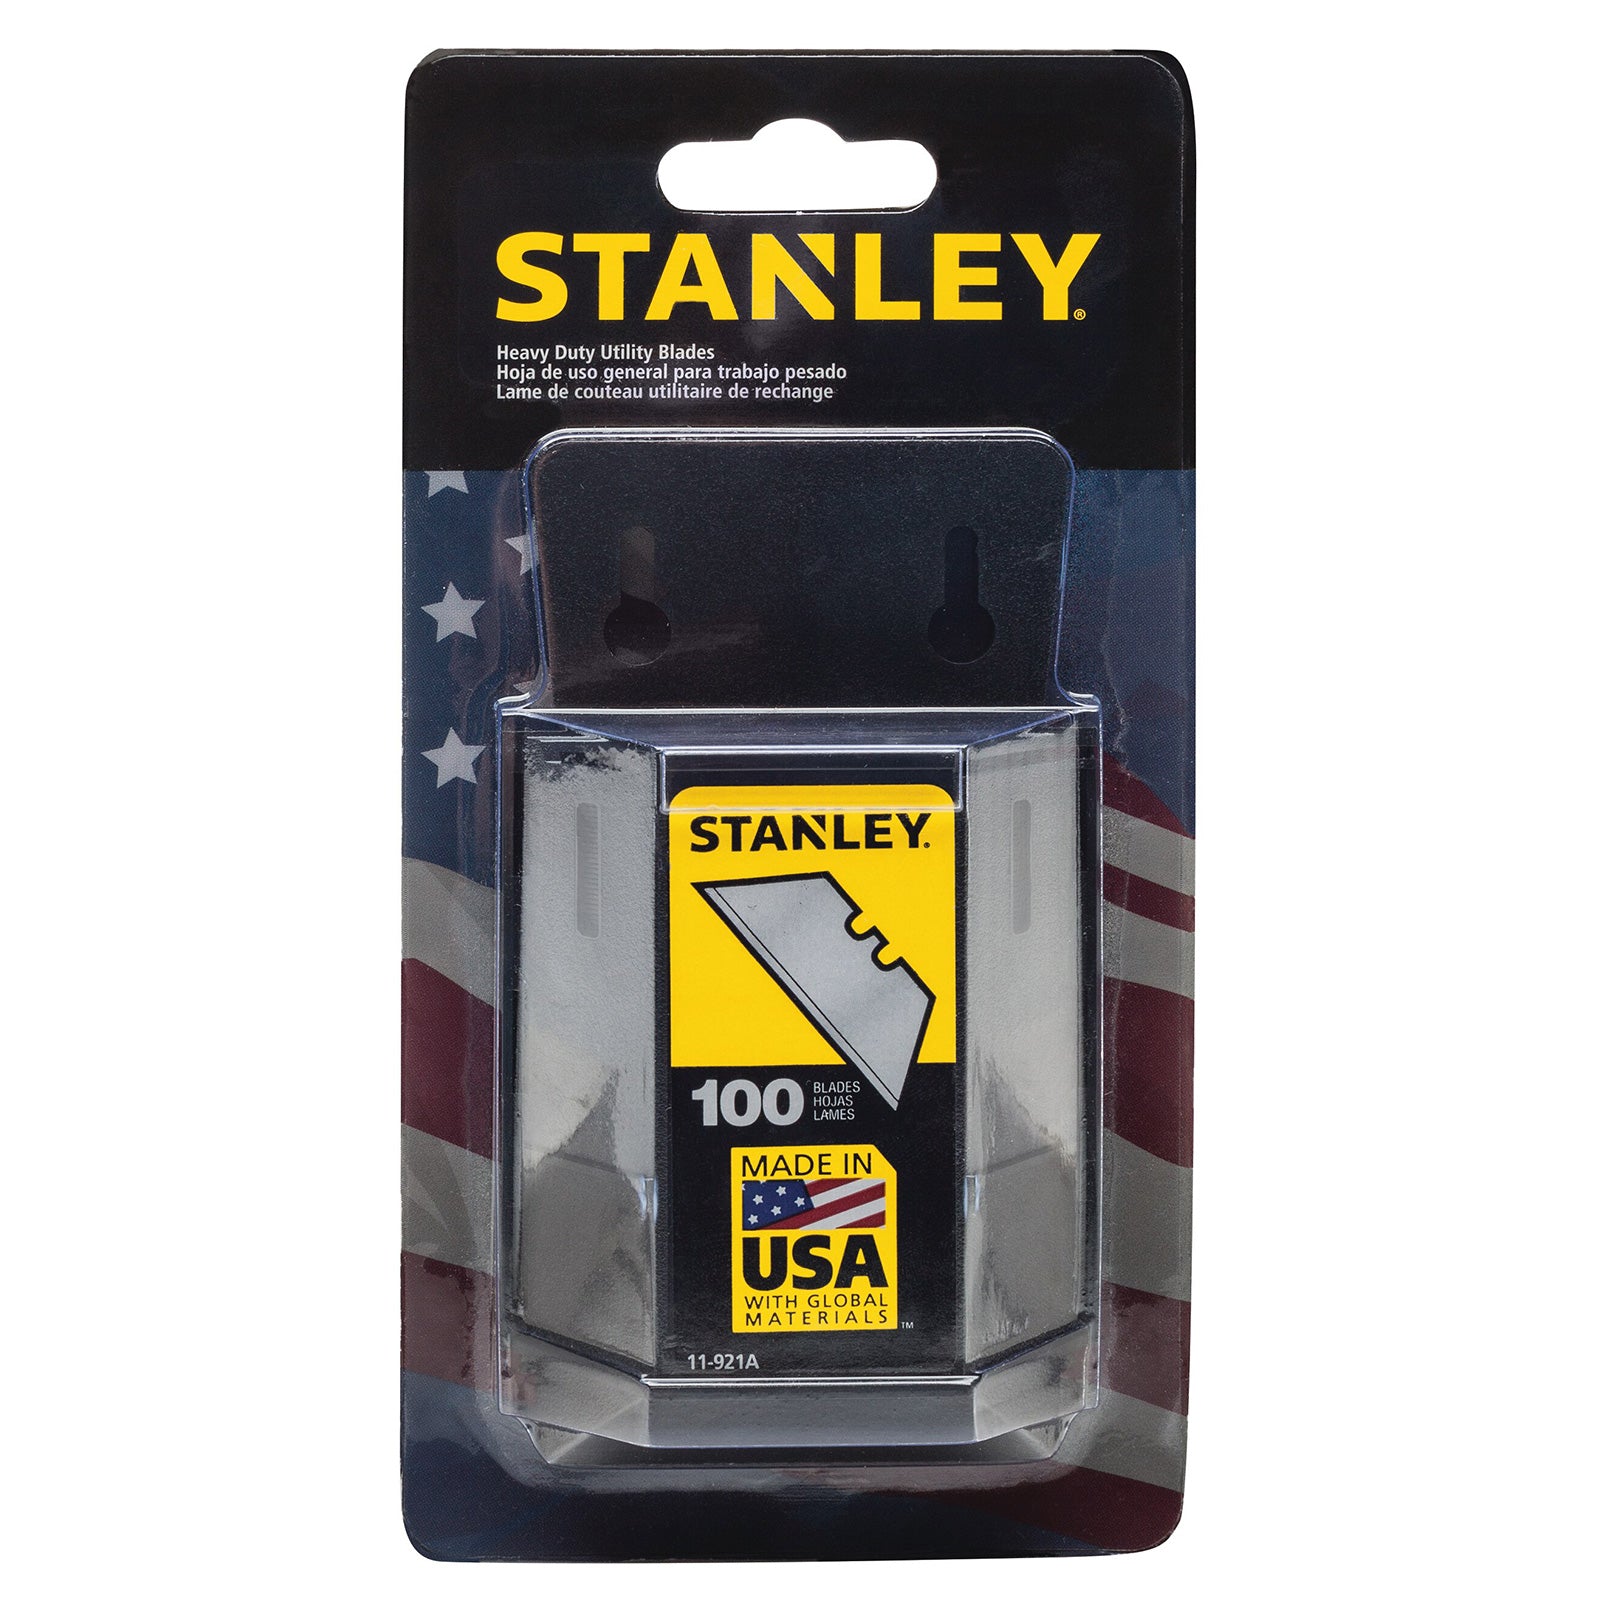 STANLEY Heavy Duty All Purpose Utility Blades (100 Pieces) - JMP Wood